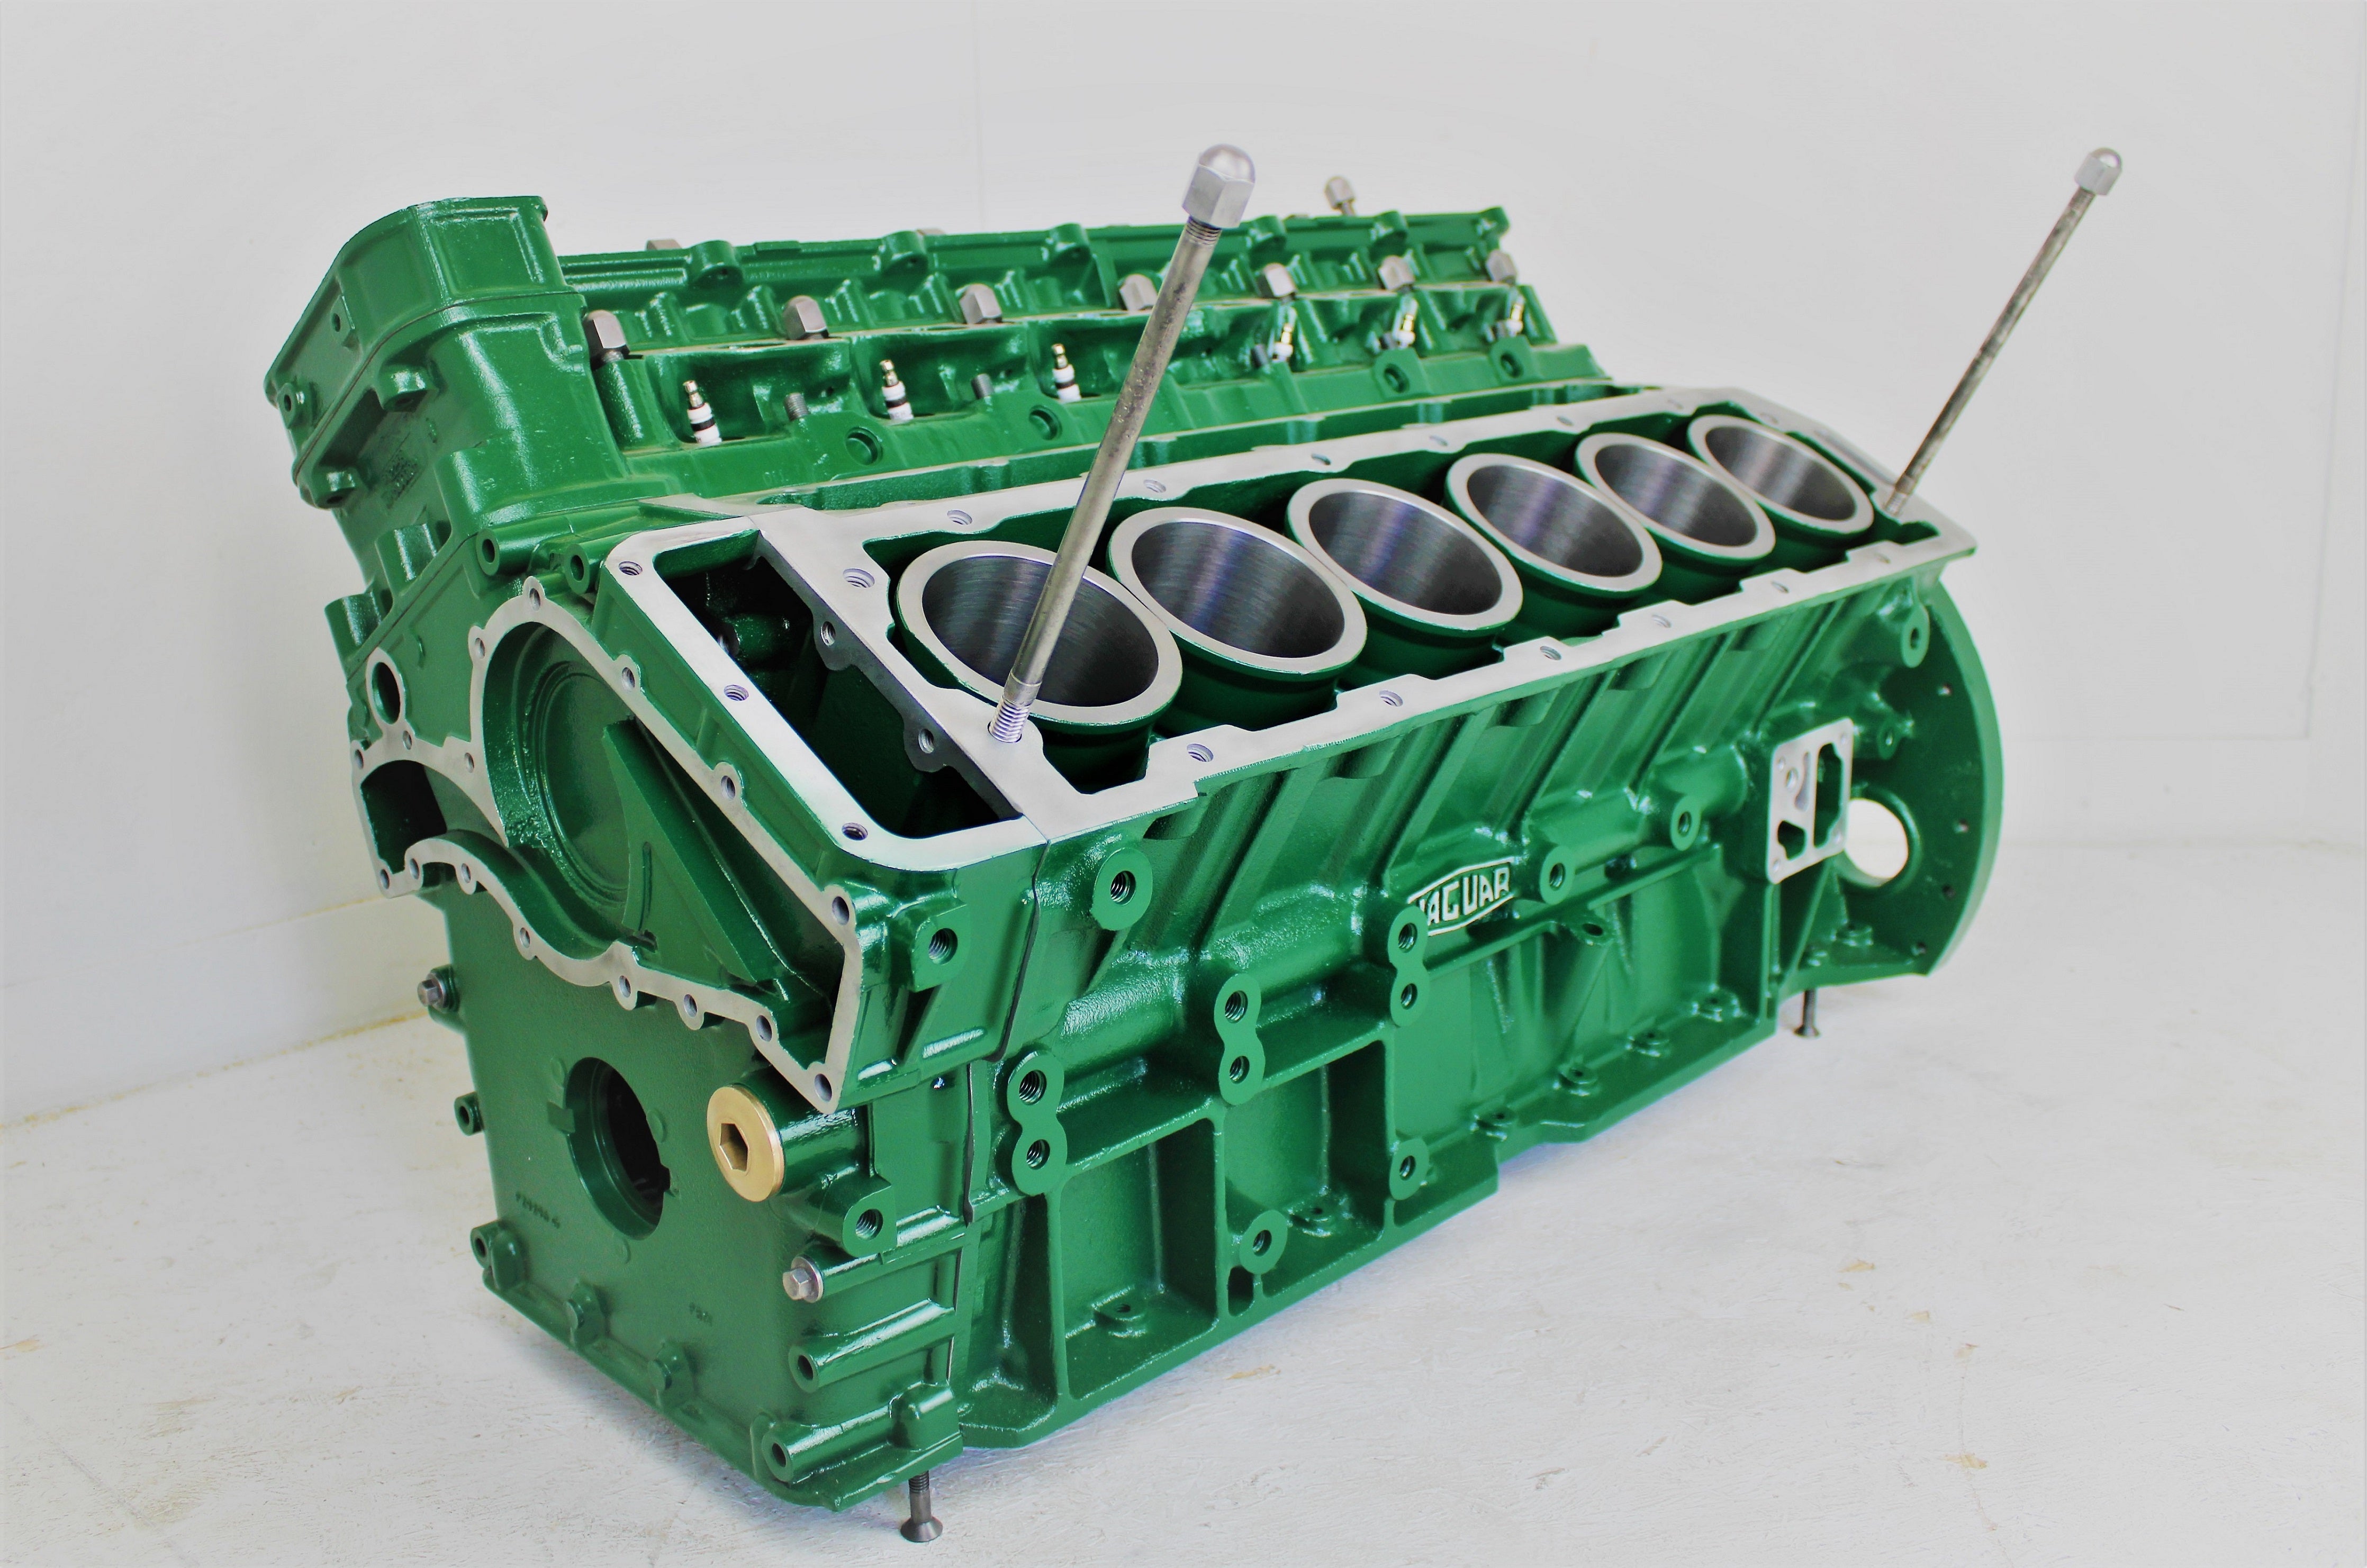 Jaguar V12 engine block coffee table, finished in British Racing Green without its glass top, the Jaguar logo displayed in the center.